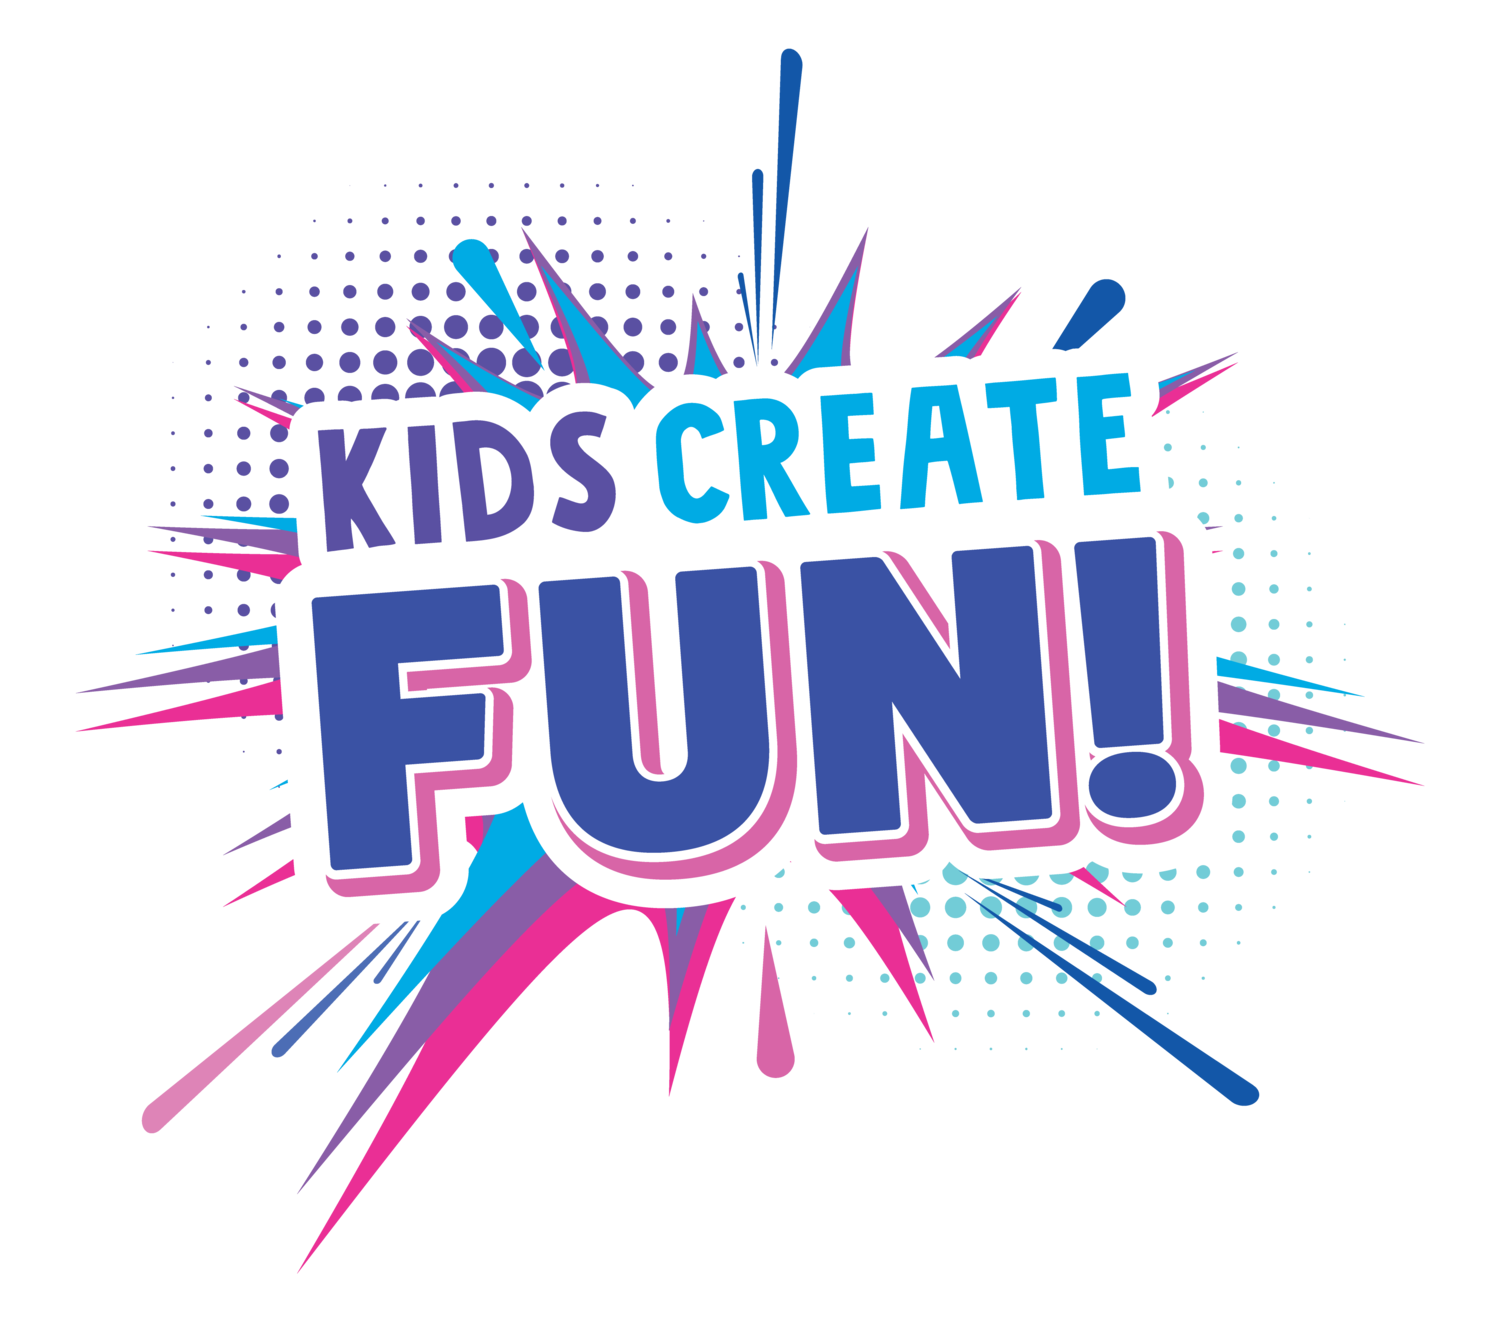 Virtual | In-person| High-Energy and Imaginative| FUNshops for Kids 5-12!